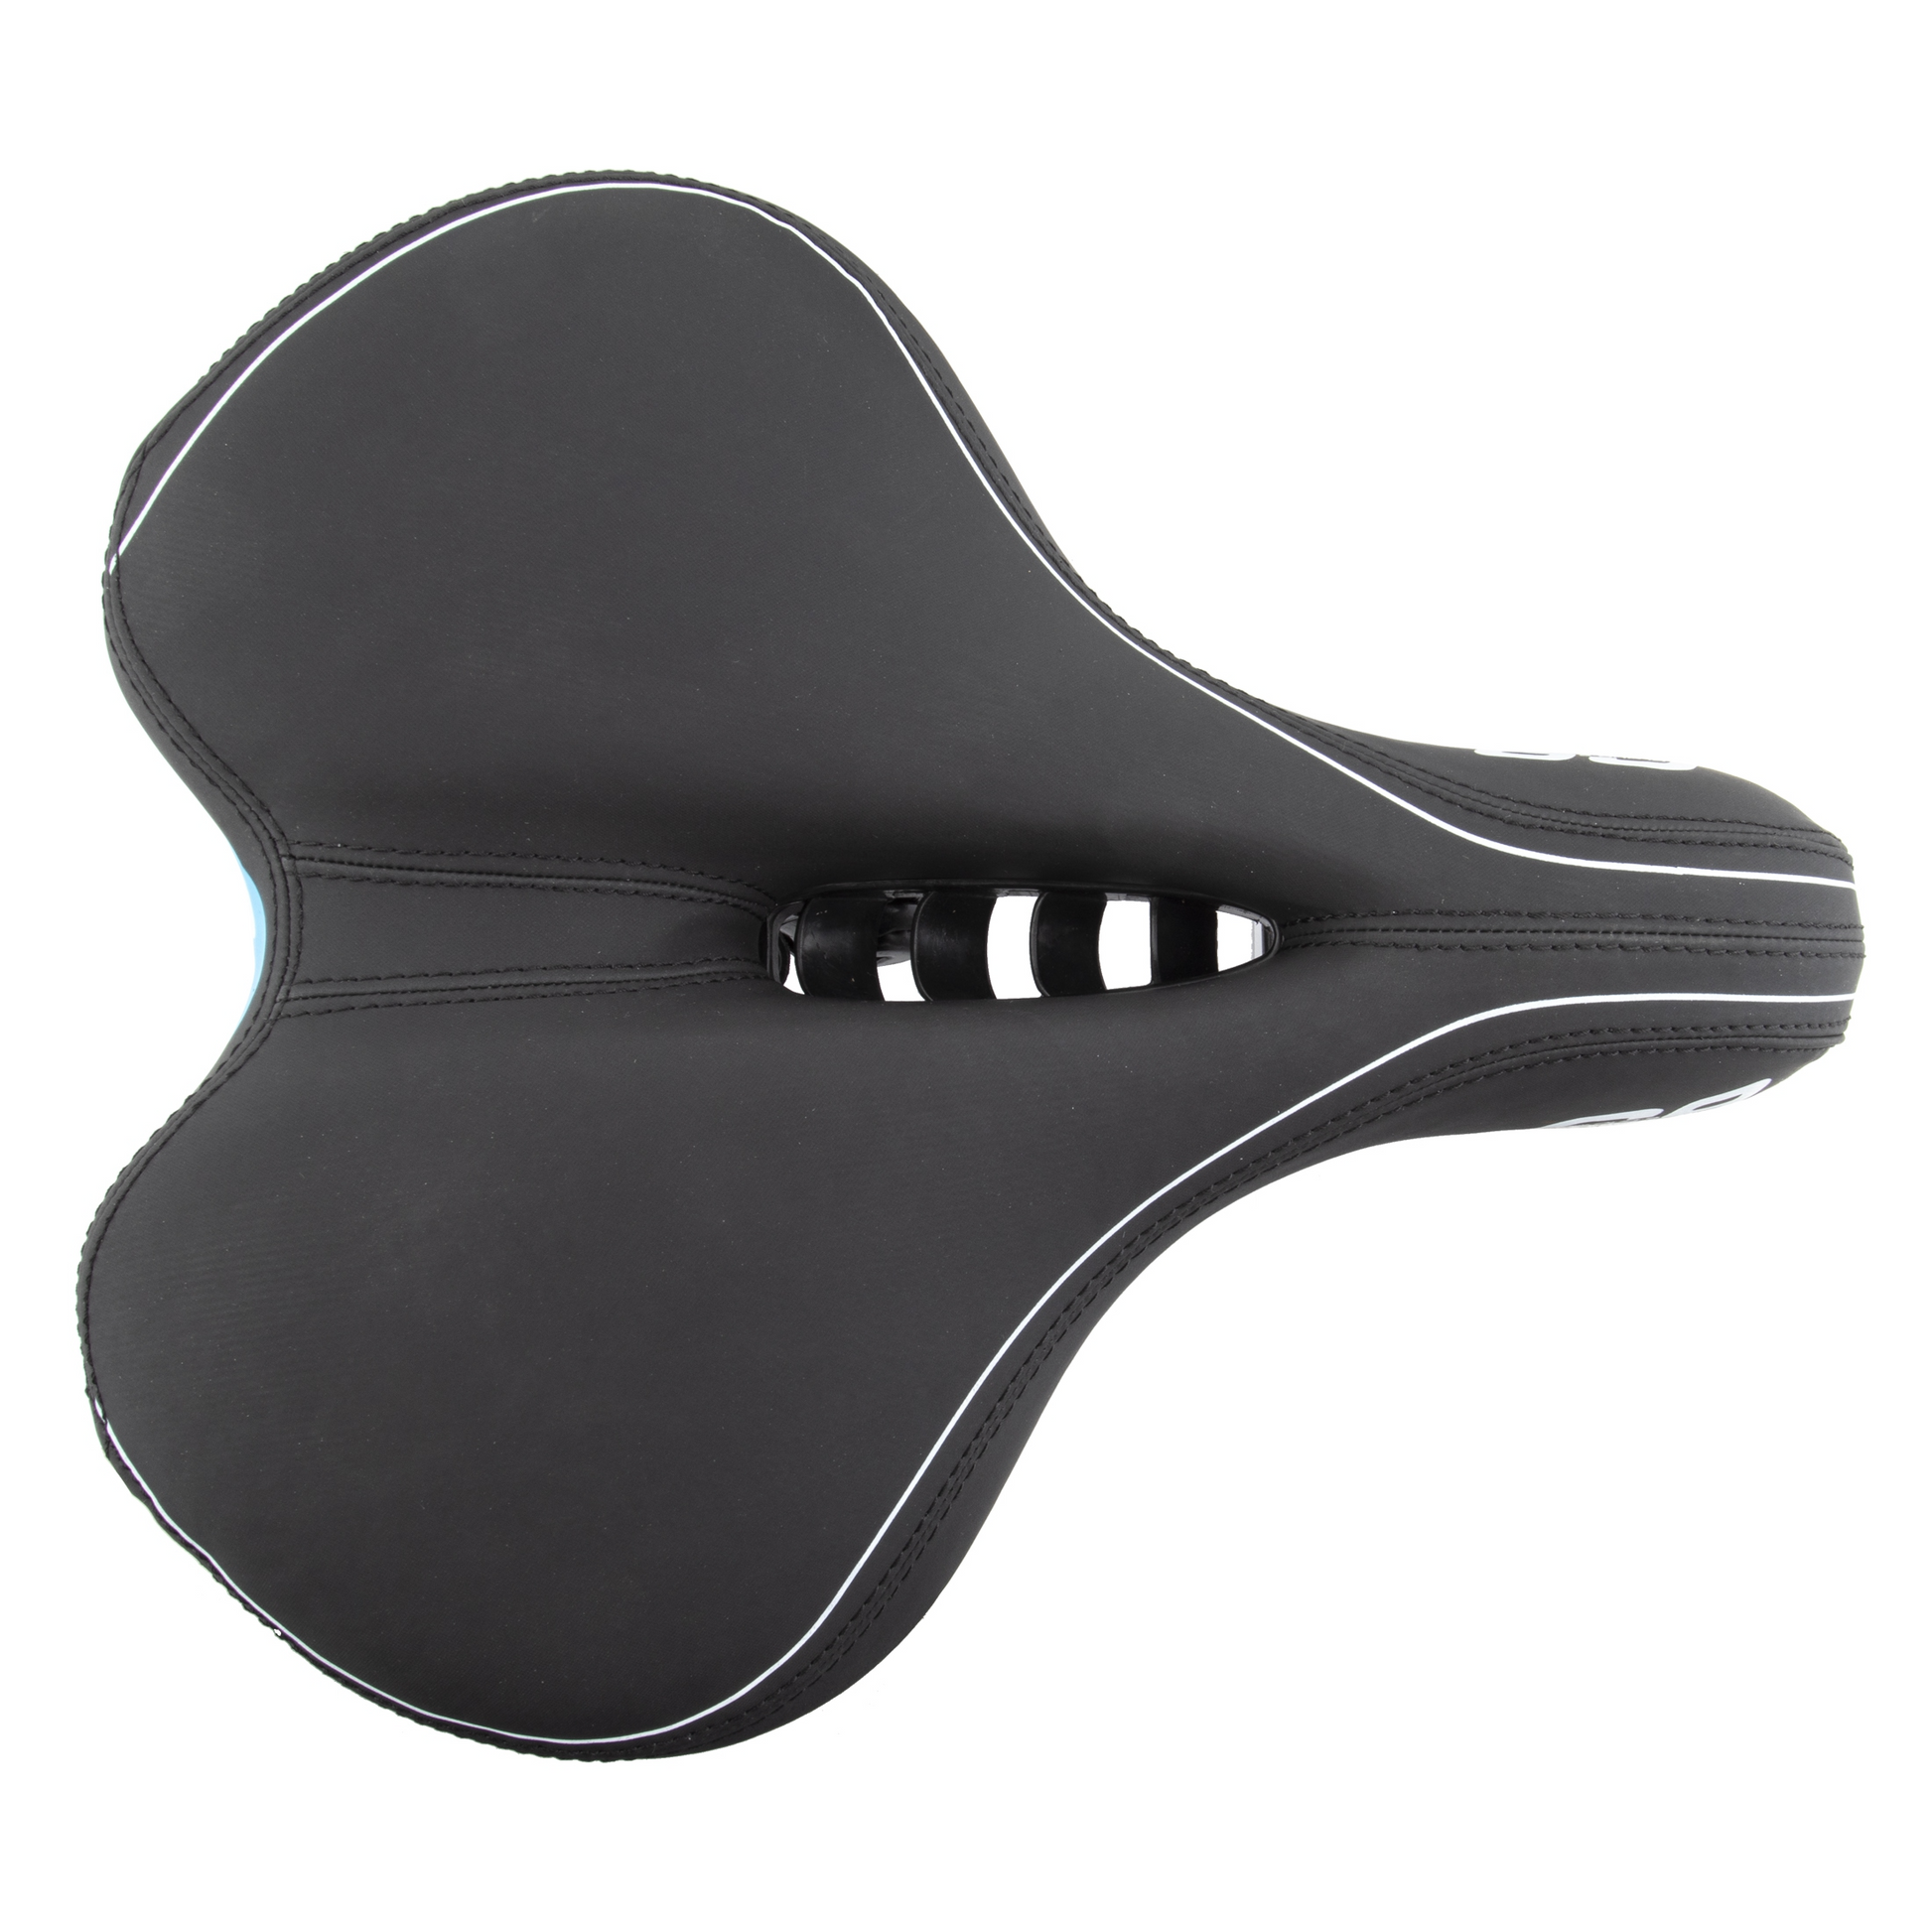 A CLOUD-9 Cruiser Sofa bicycle seat with white stitching.